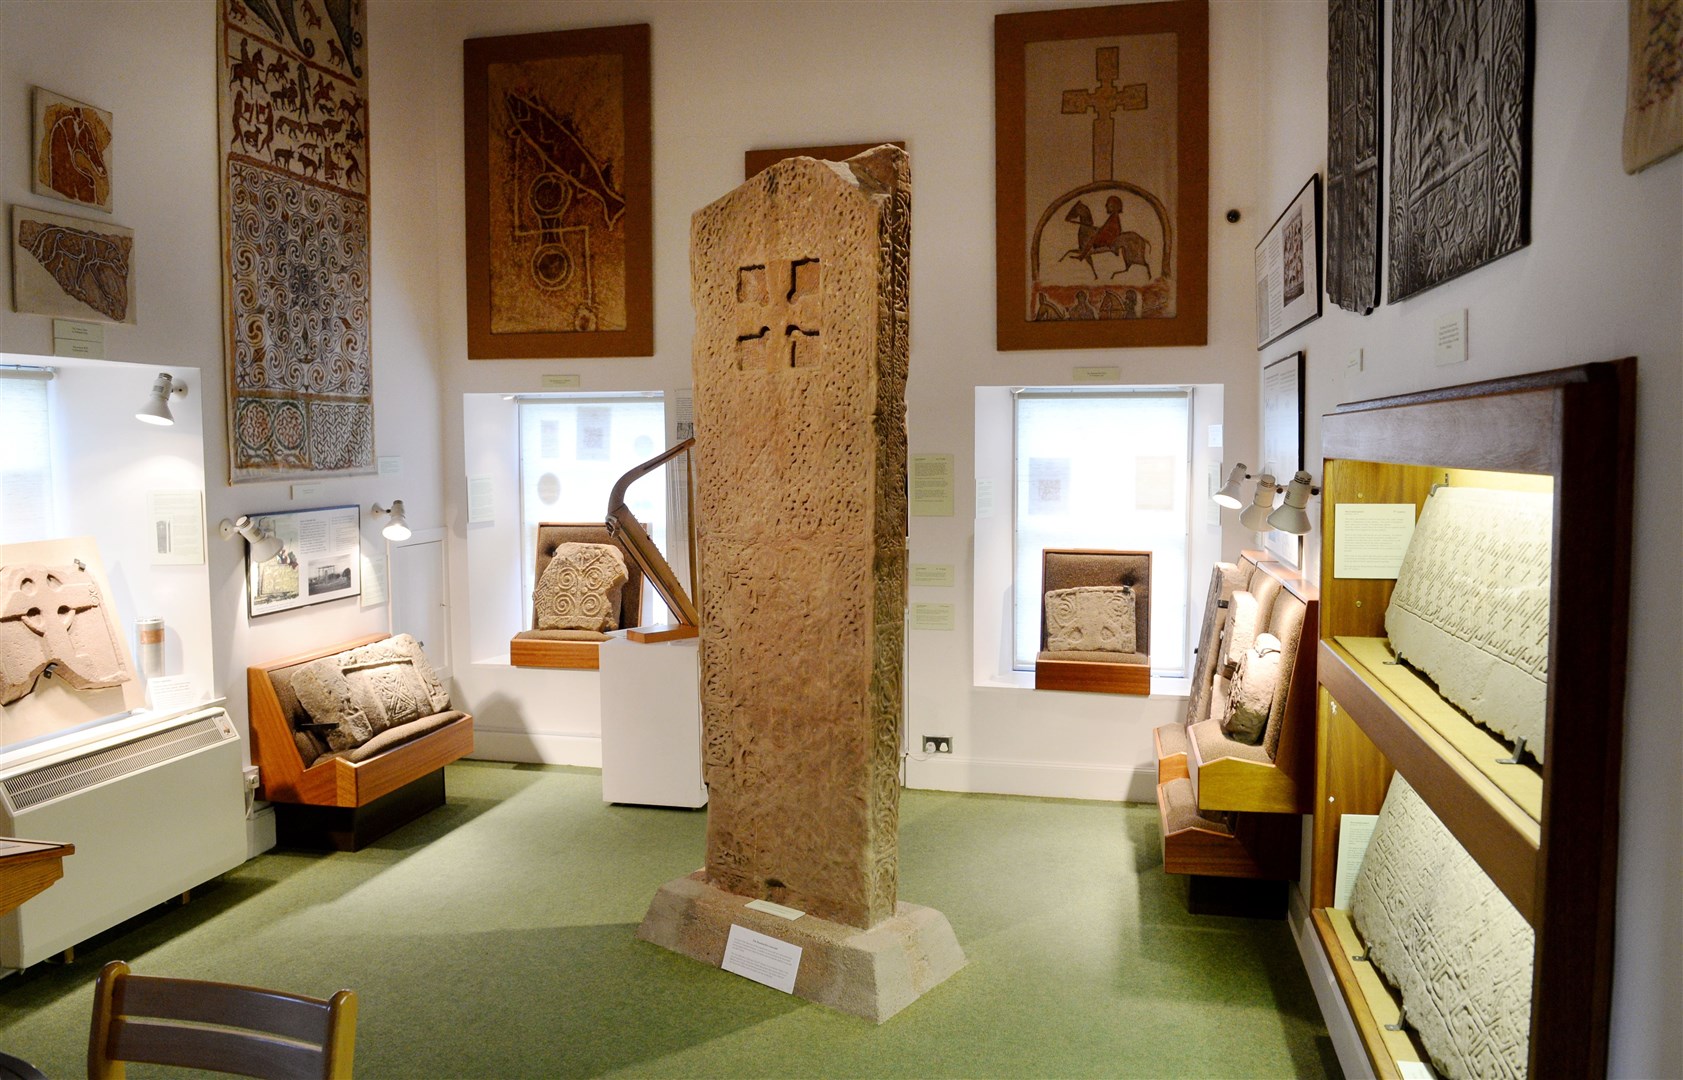 Groam House Museum in Rosemarkie has benefited from cash to breathe new life into a nationally significant collection of Celtic art. Picture: Gary Anthony. Image No. 036530.